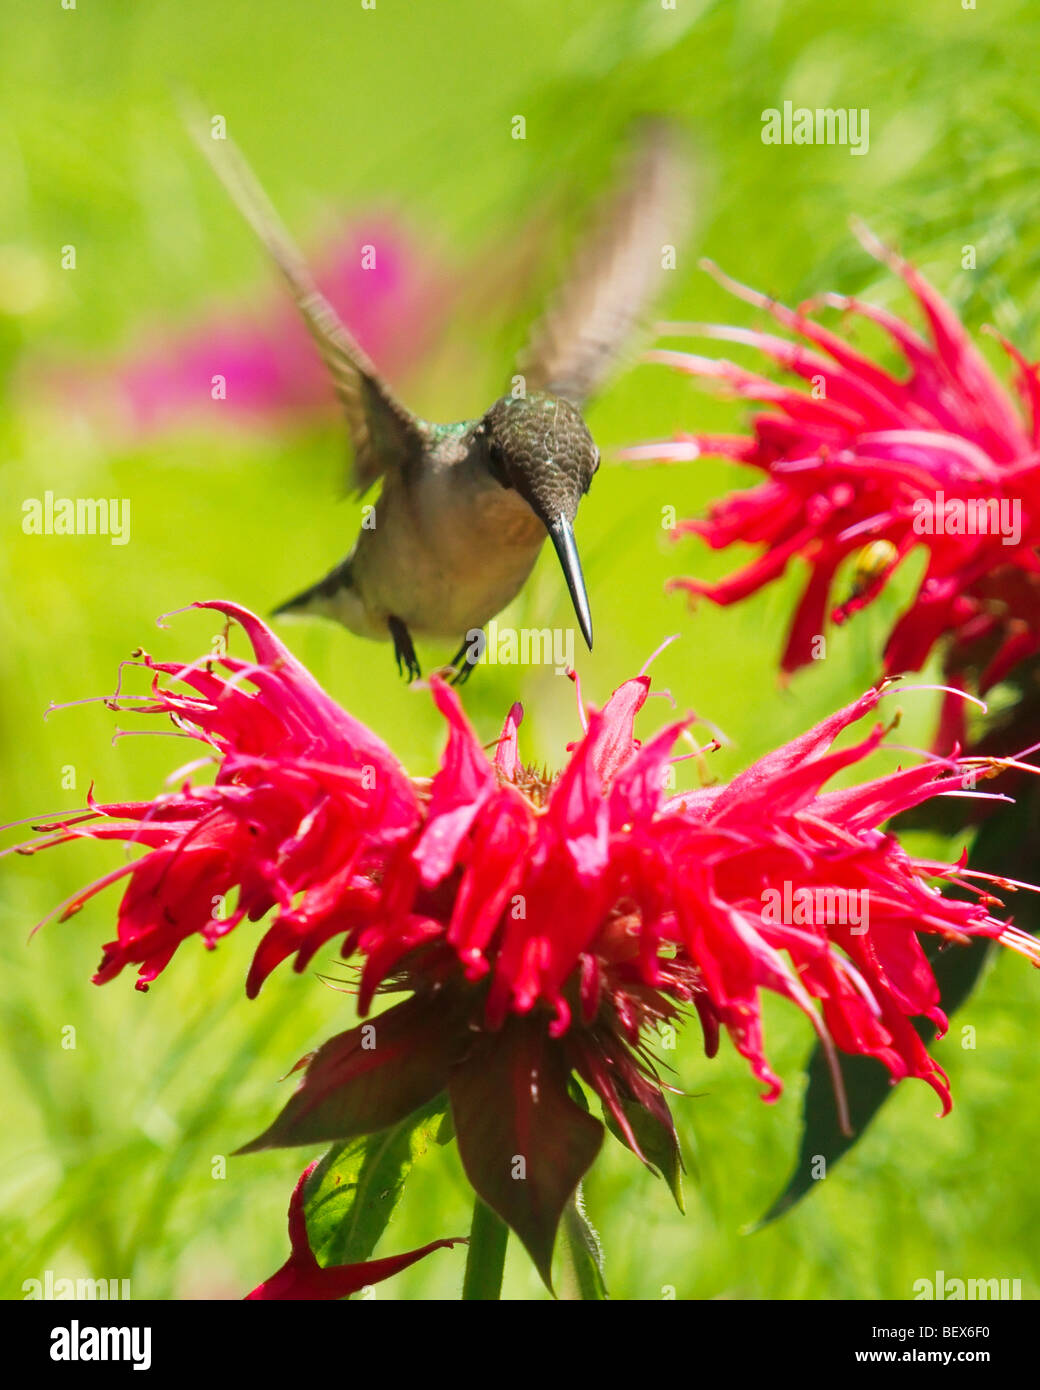 A Ruby-Throated Hummingbird drinking from red Monarda blooms Stock Photo